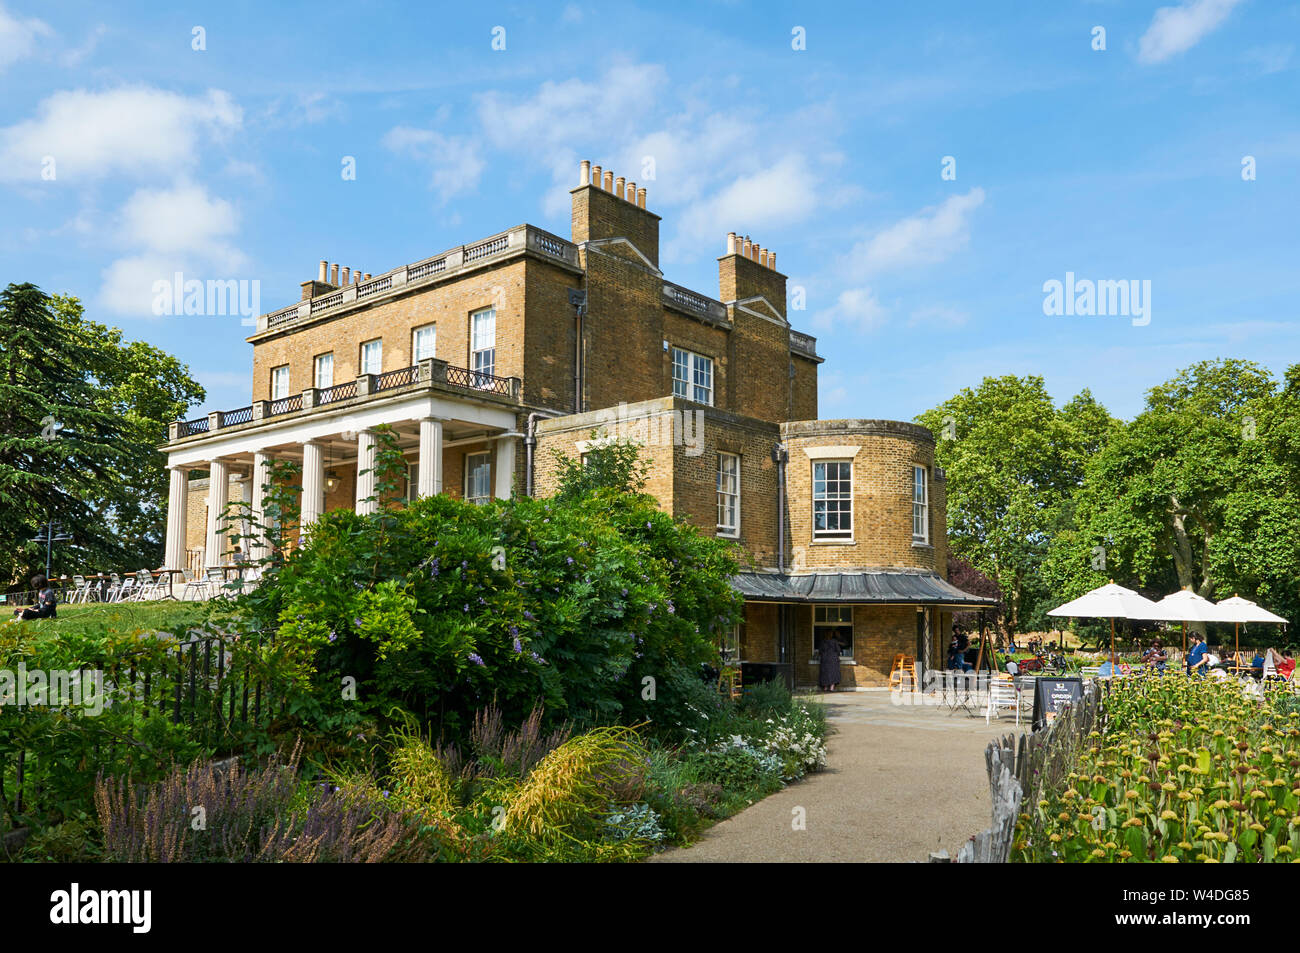 The historic Clissold House, Clissold Park, Stoke Newington, North London, in summertime with people outside Stock Photo